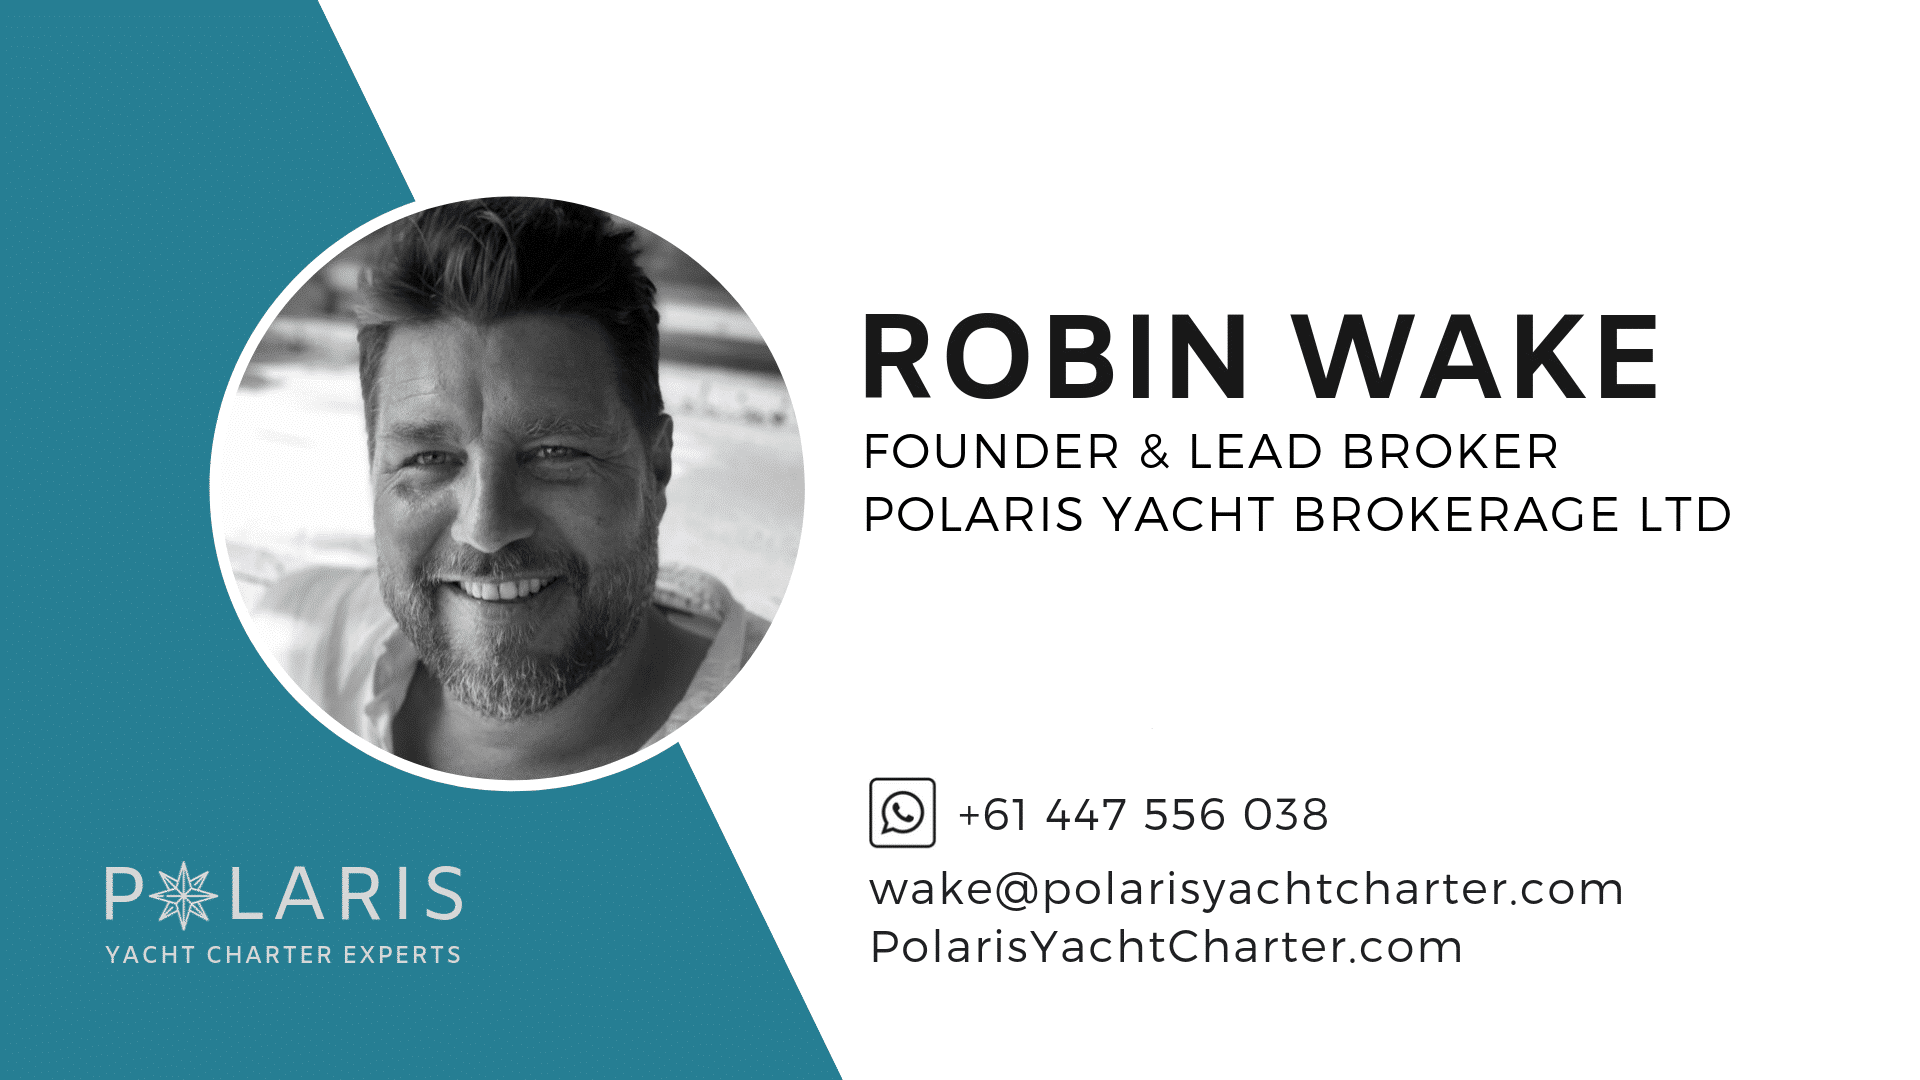 CONTACT DETAILS ROBIN WAKE